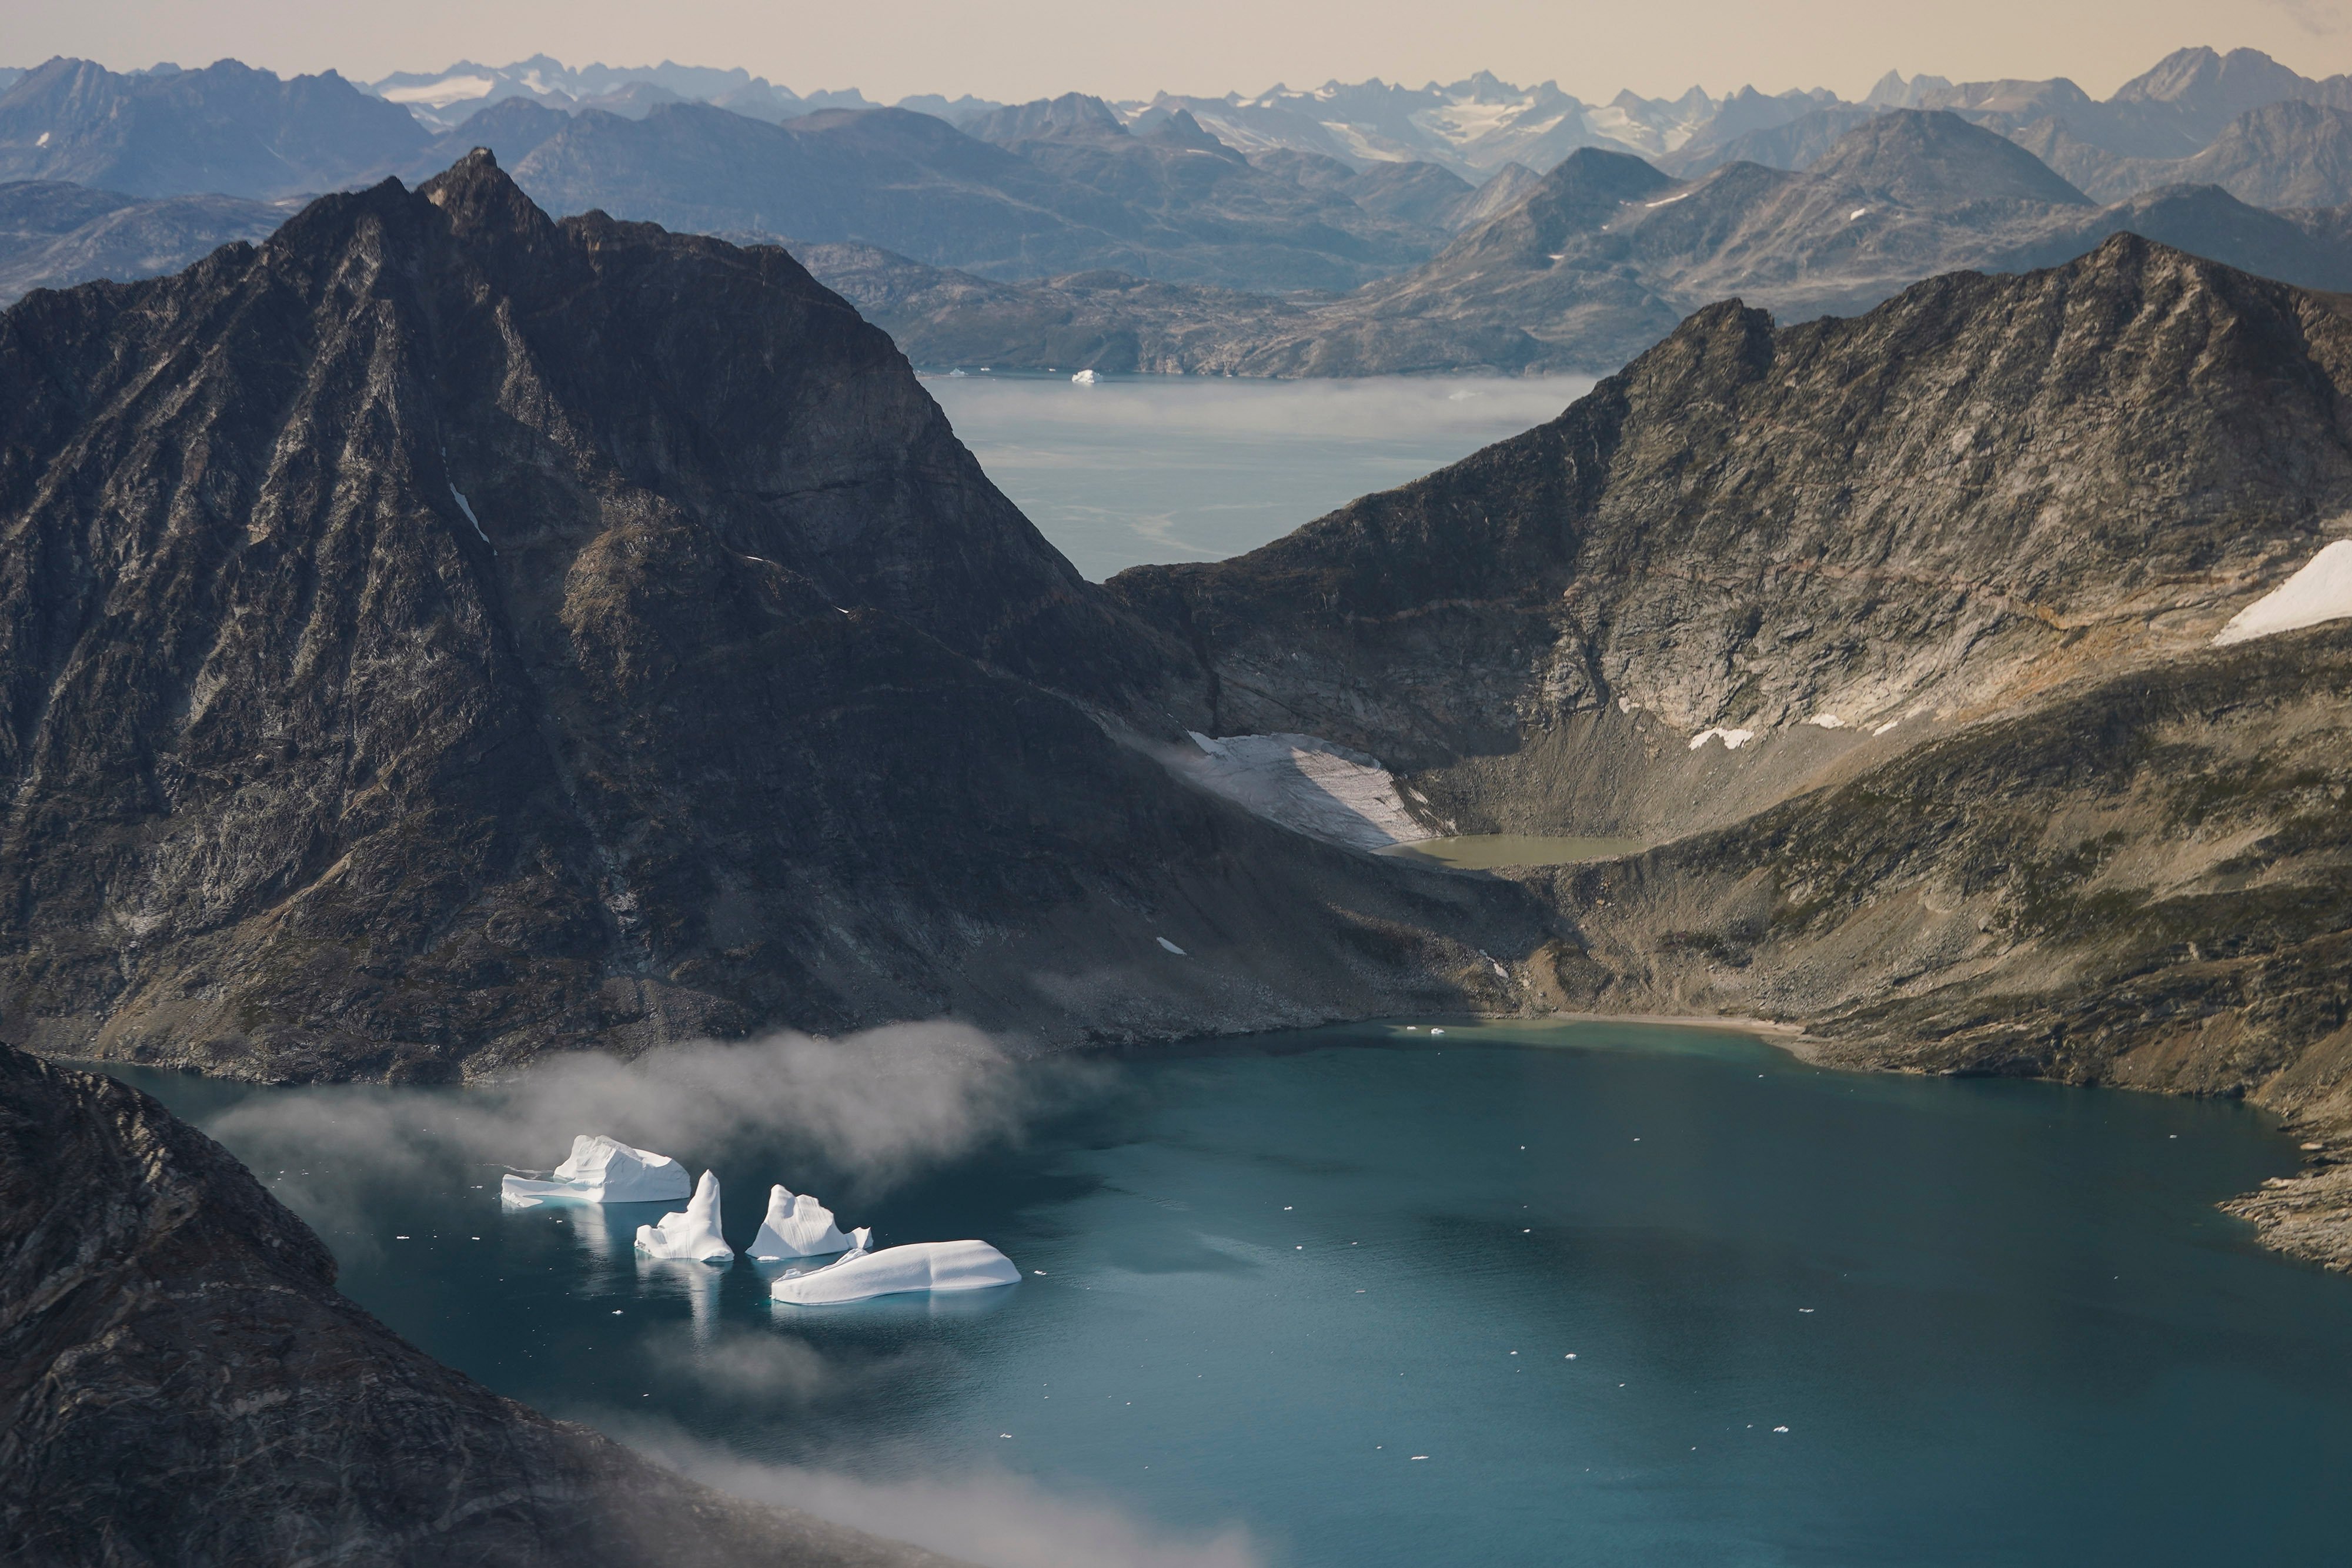 Greenland expedition discovers ‘world’s northernmost island’